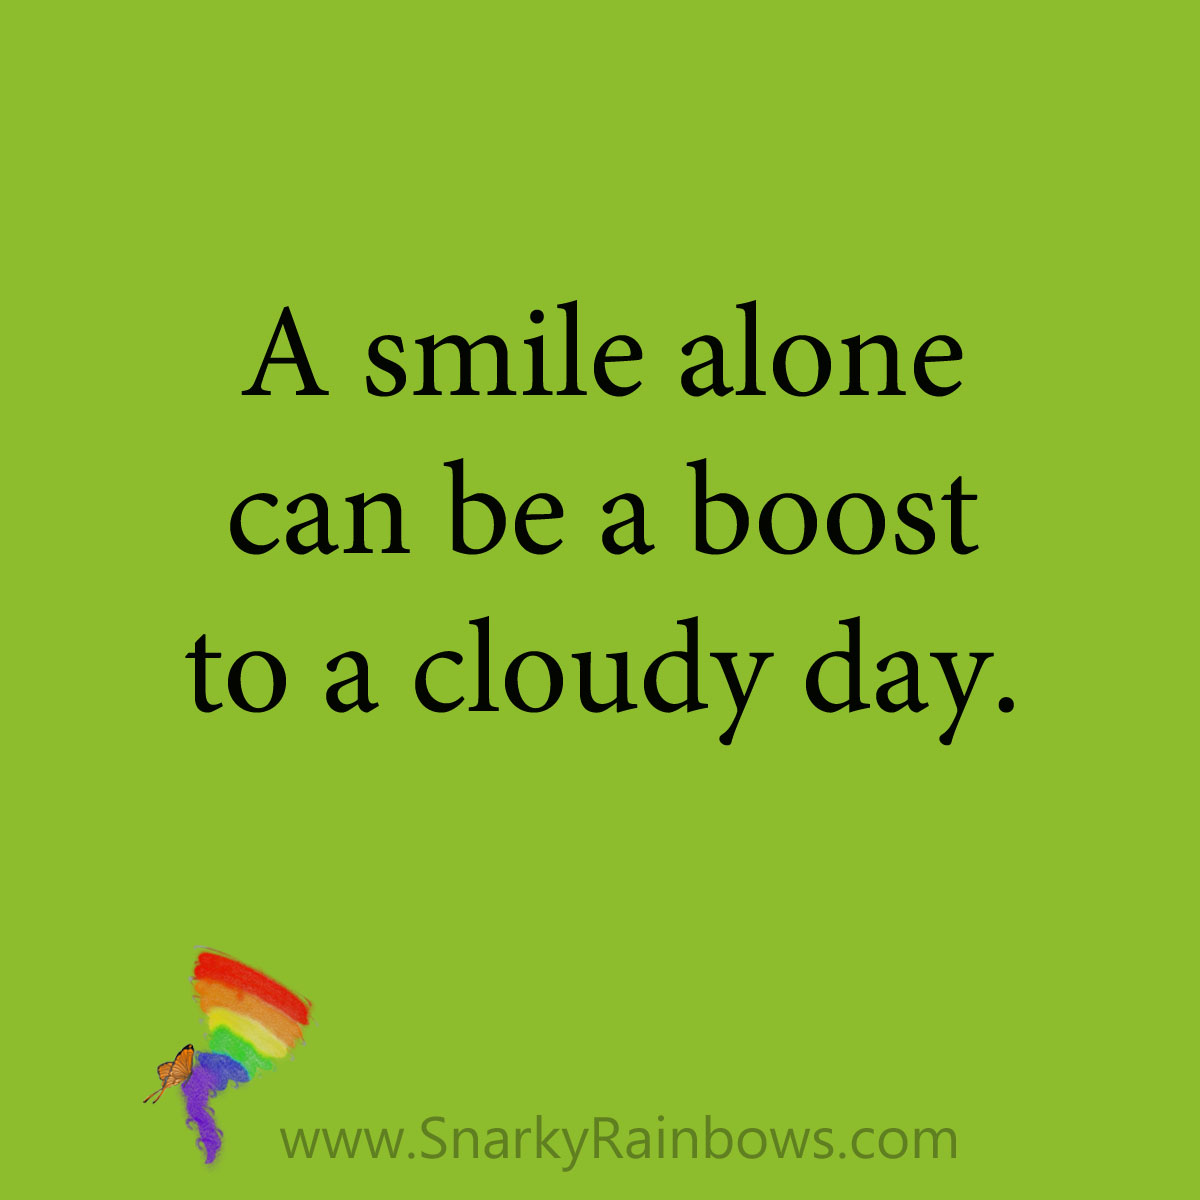 quote - power of a smile alone